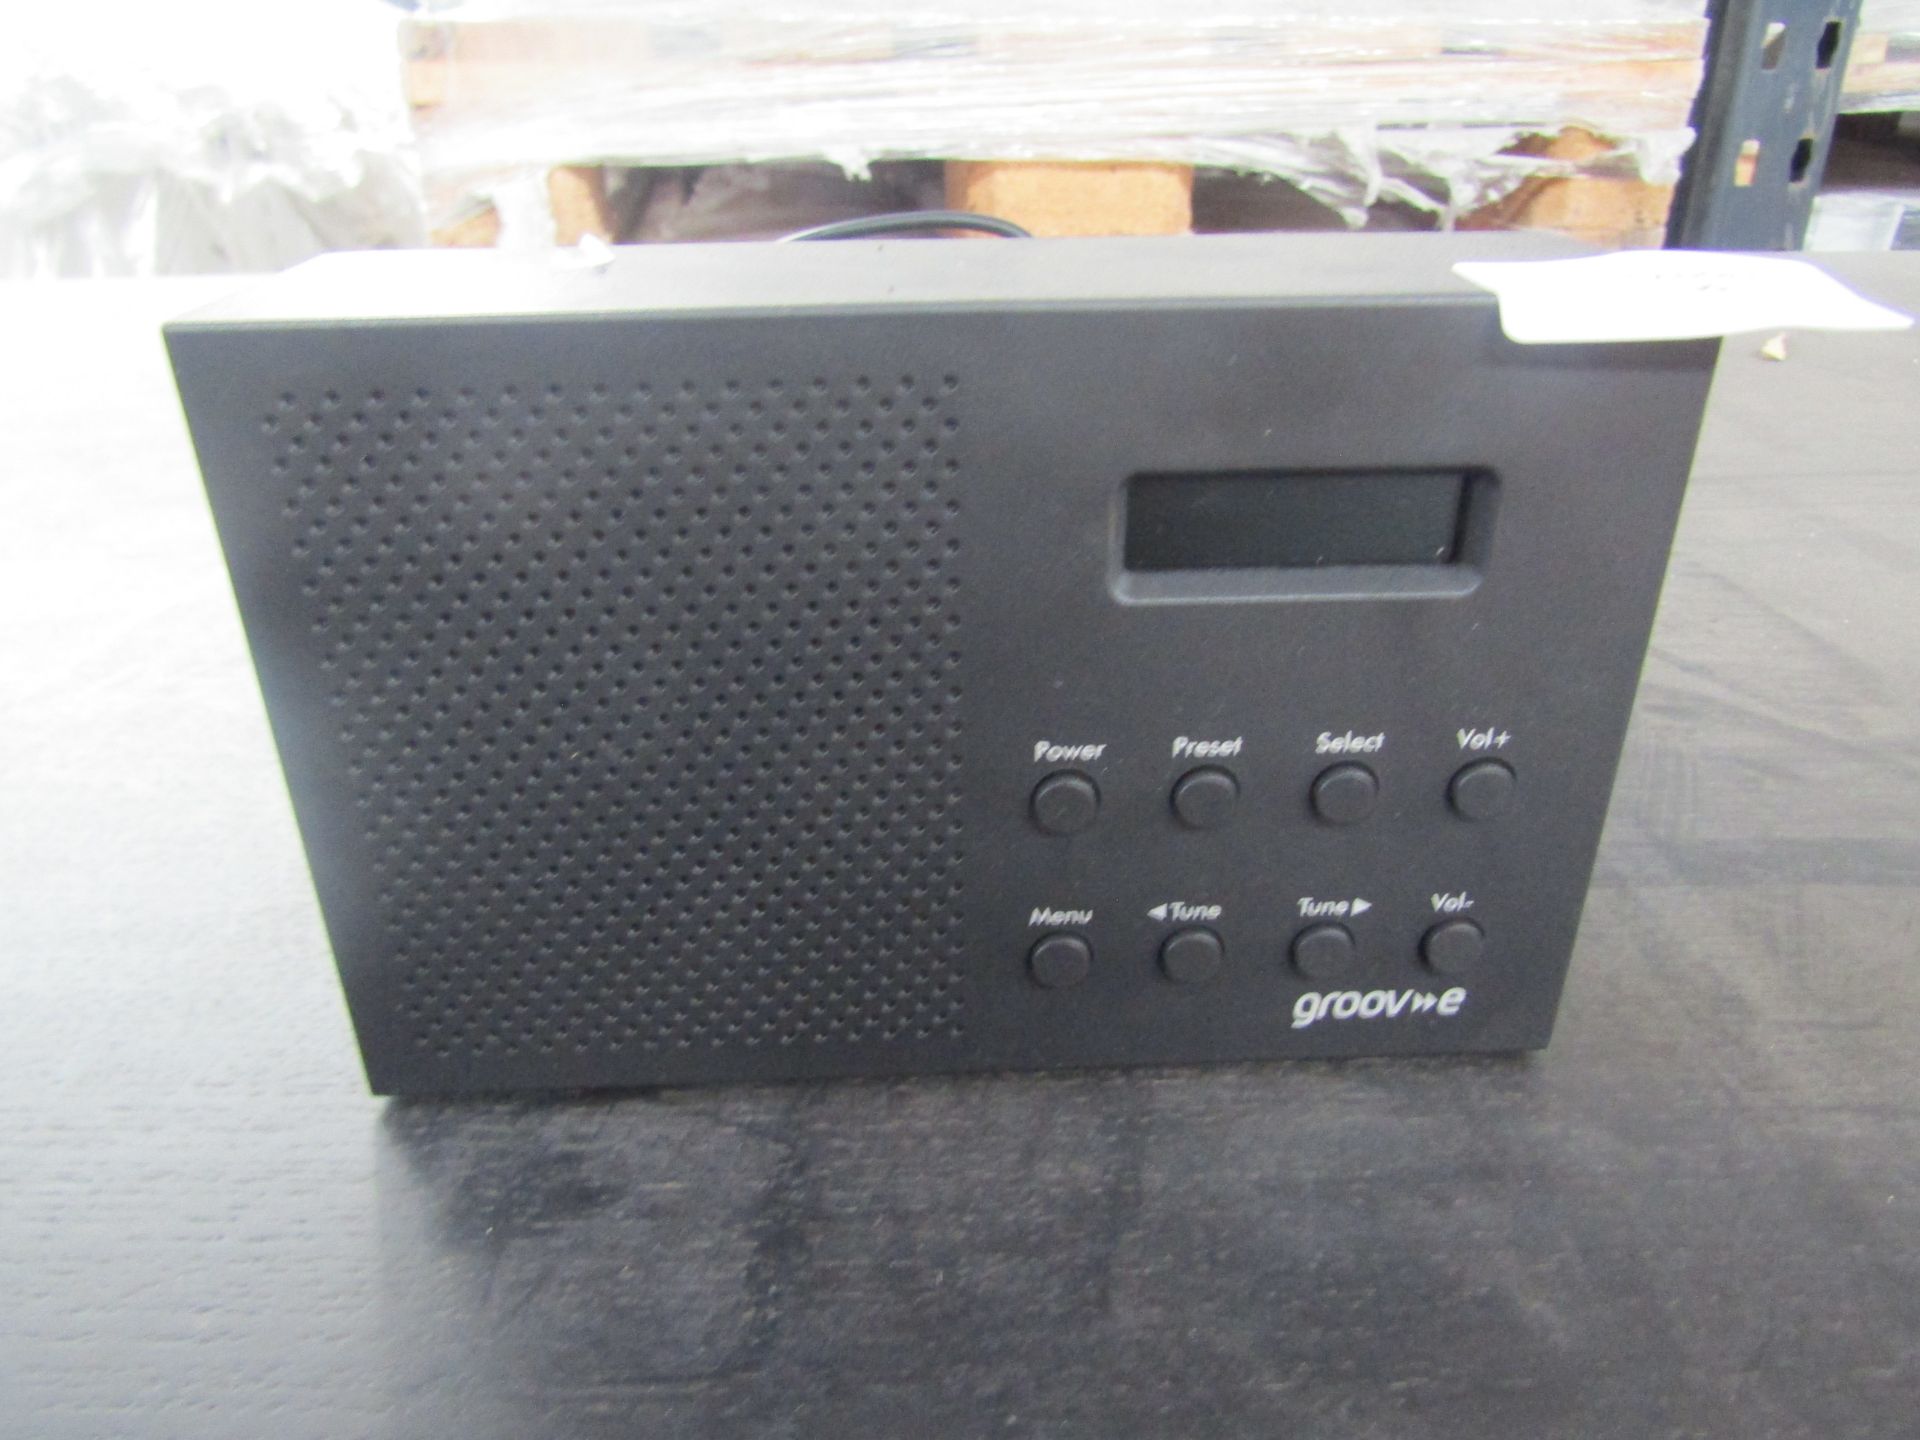 Groove Portable DAB/FM Digital Radio - Unchecked & Unboxed.